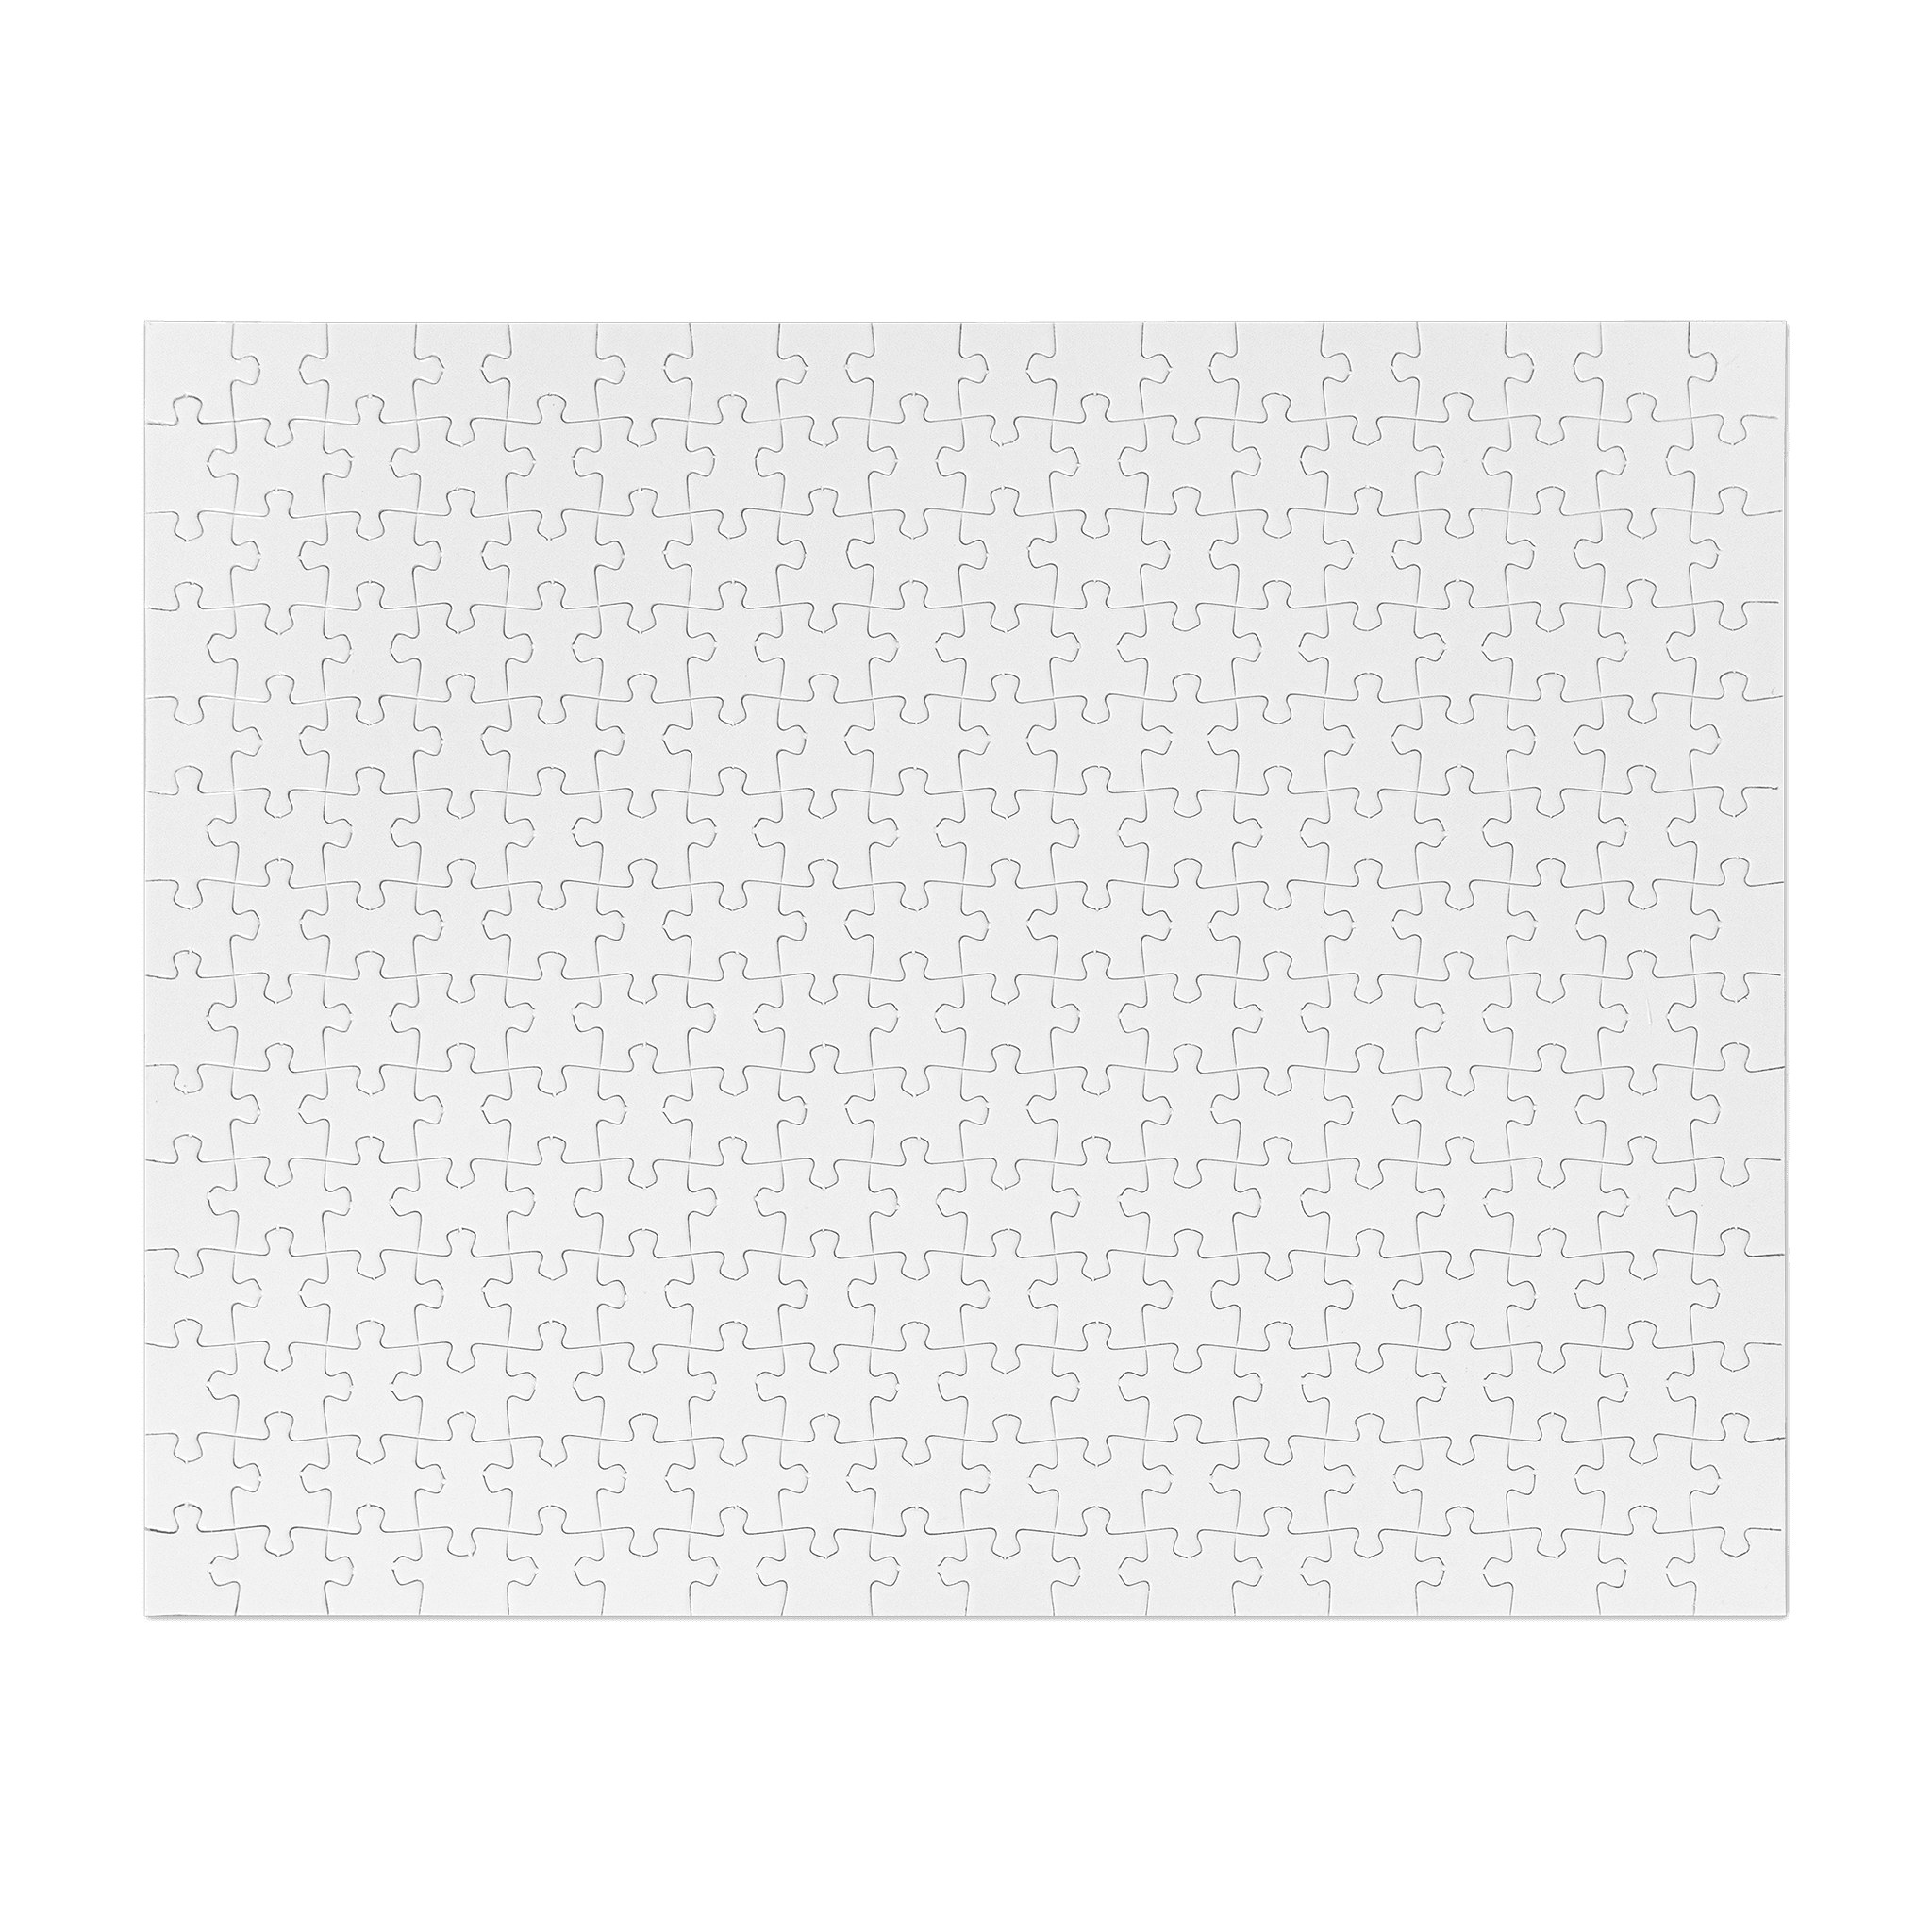 Round Blank Jigsaw Puzzles for Sublimation DIY, 25 Pieces (12 In, 12  Sheets), PACK - Harris Teeter